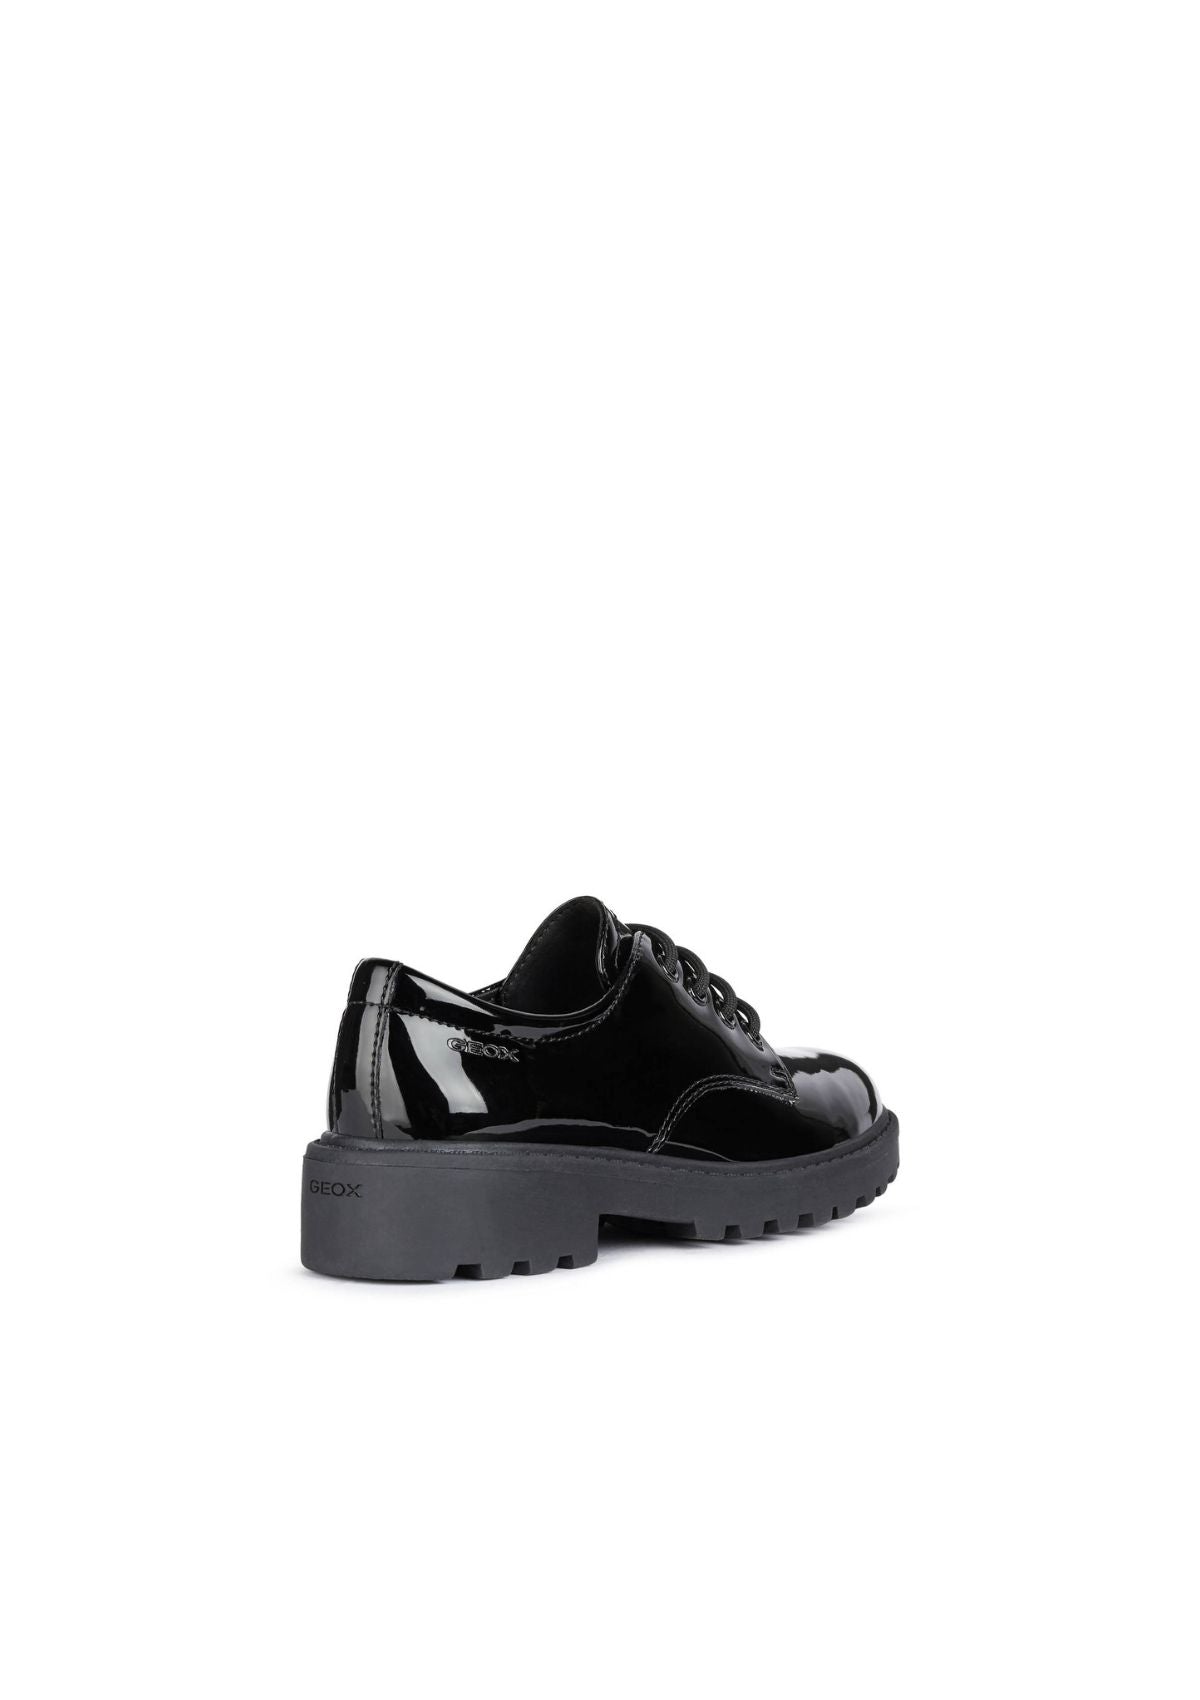 Geox Girls School Shoes CASEY Black Patent Laced side back